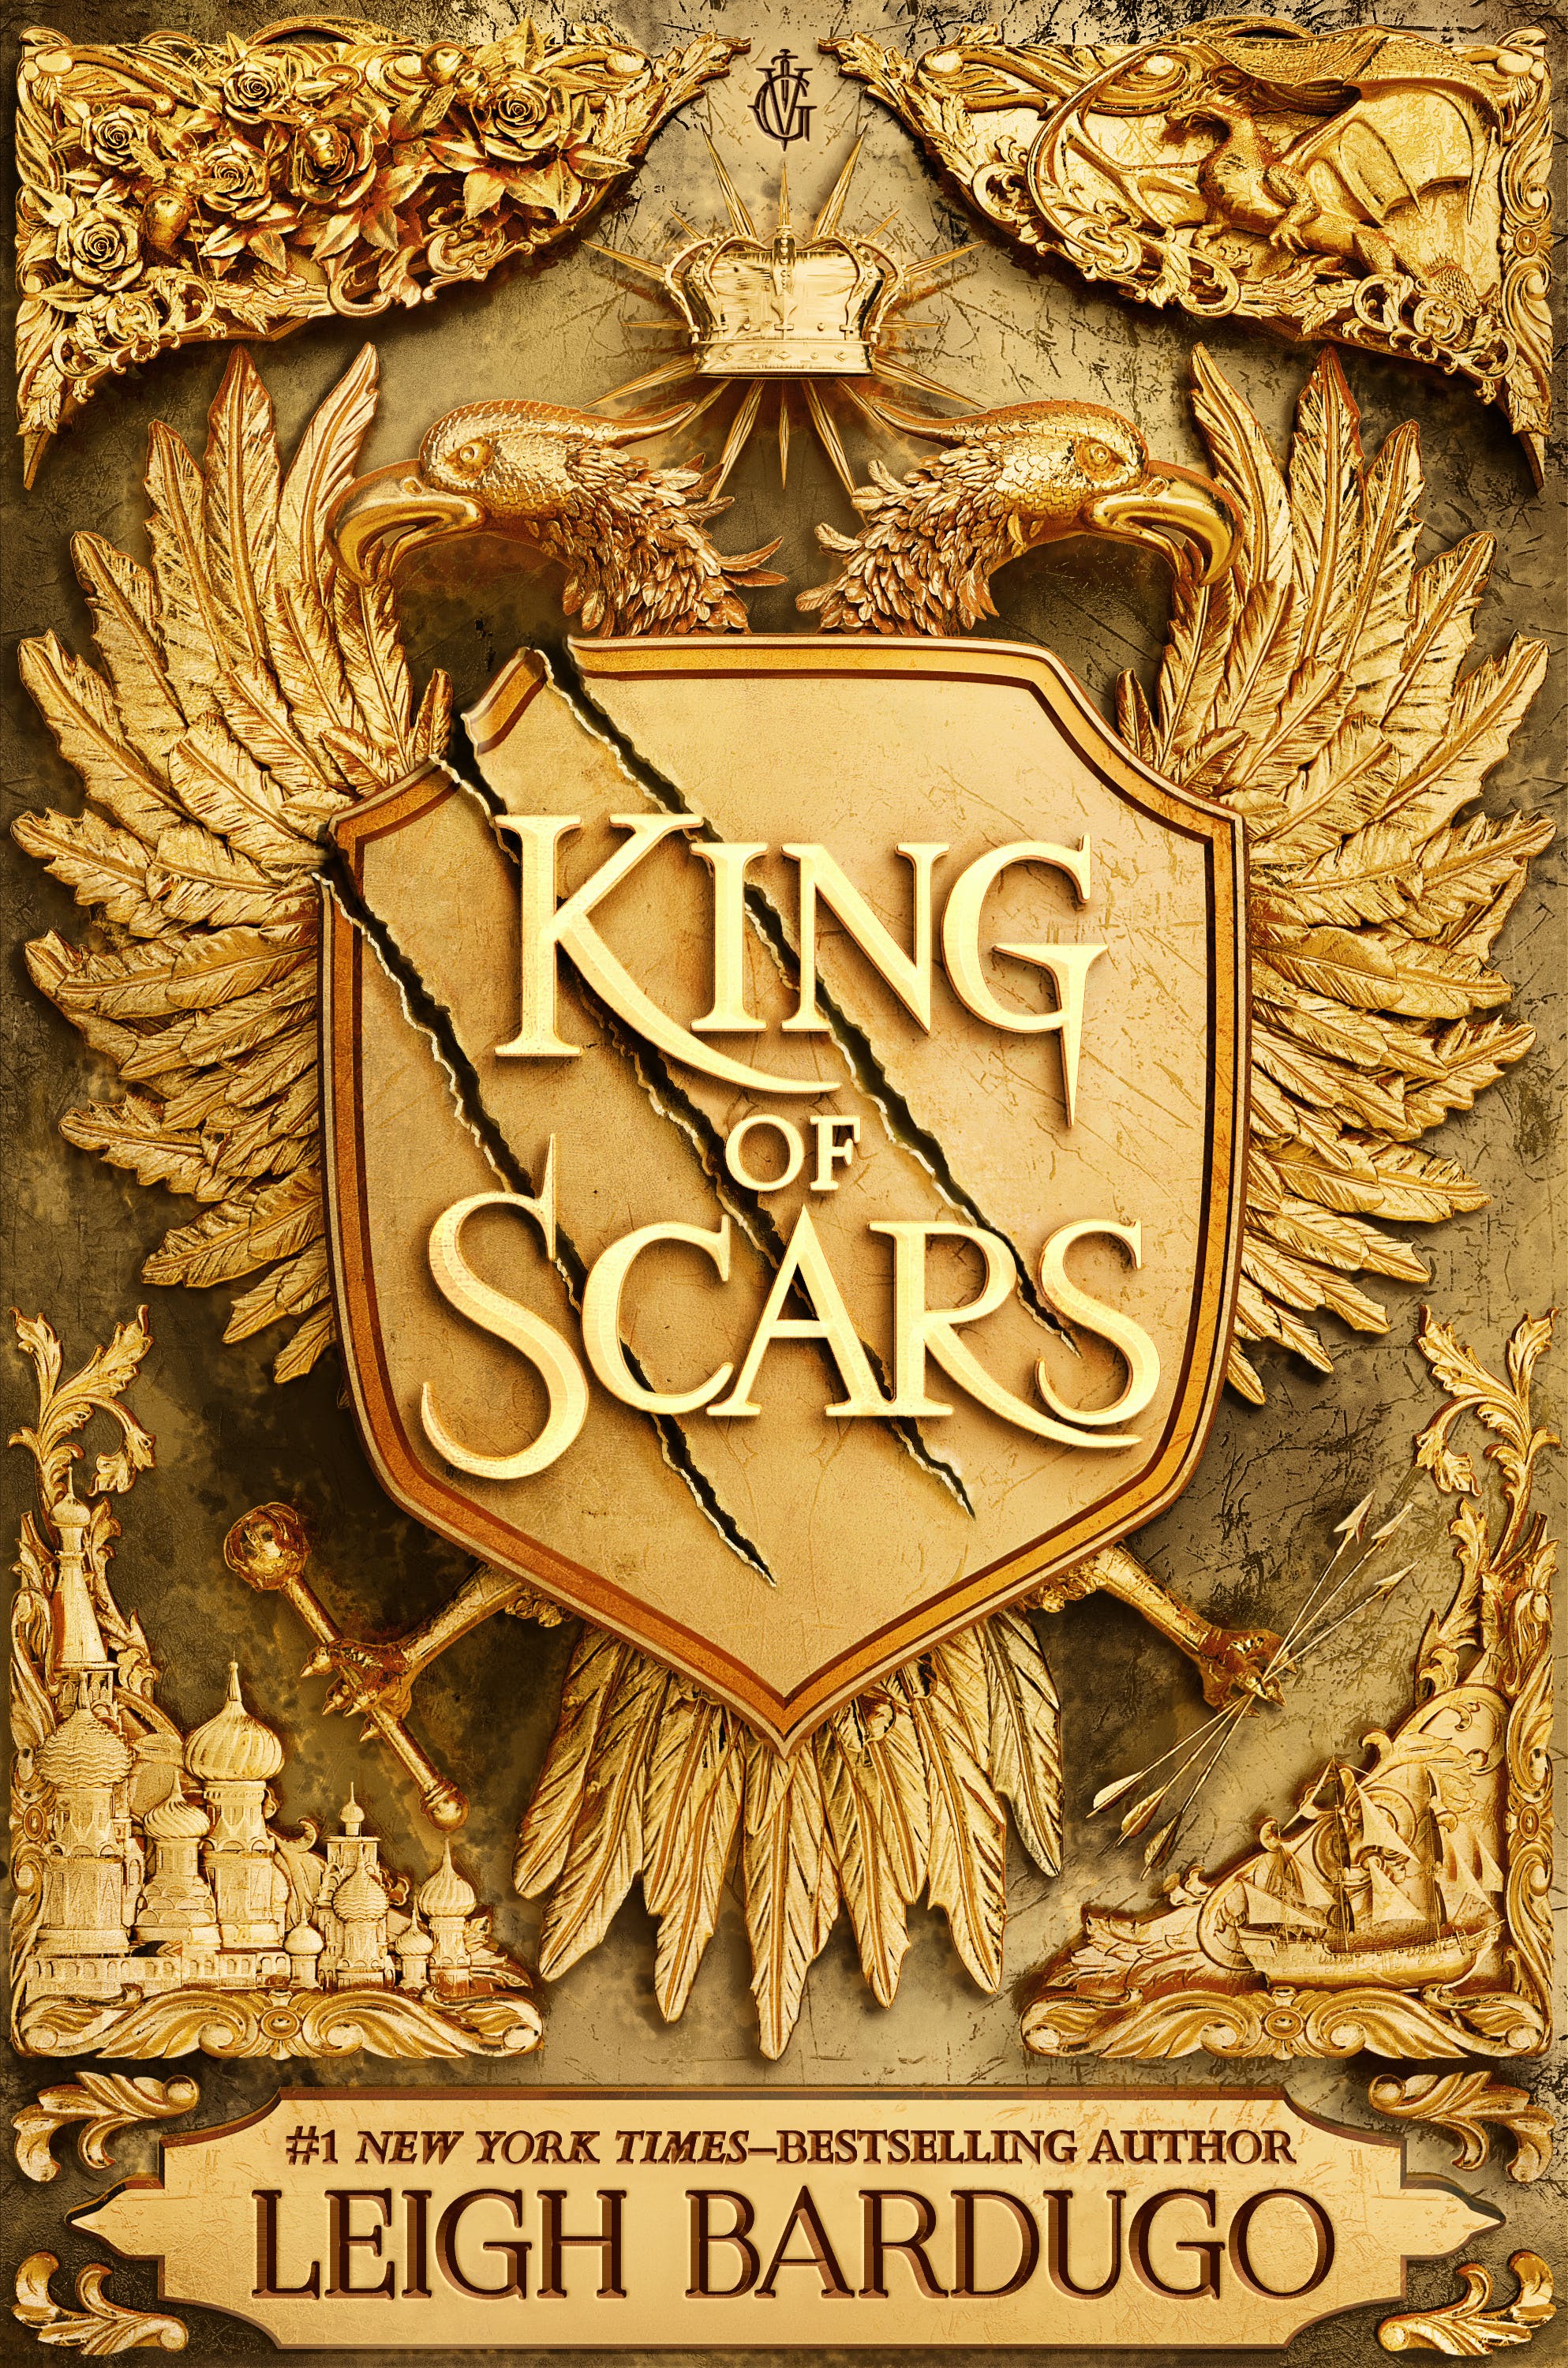 King of Scars scars above [ps5]